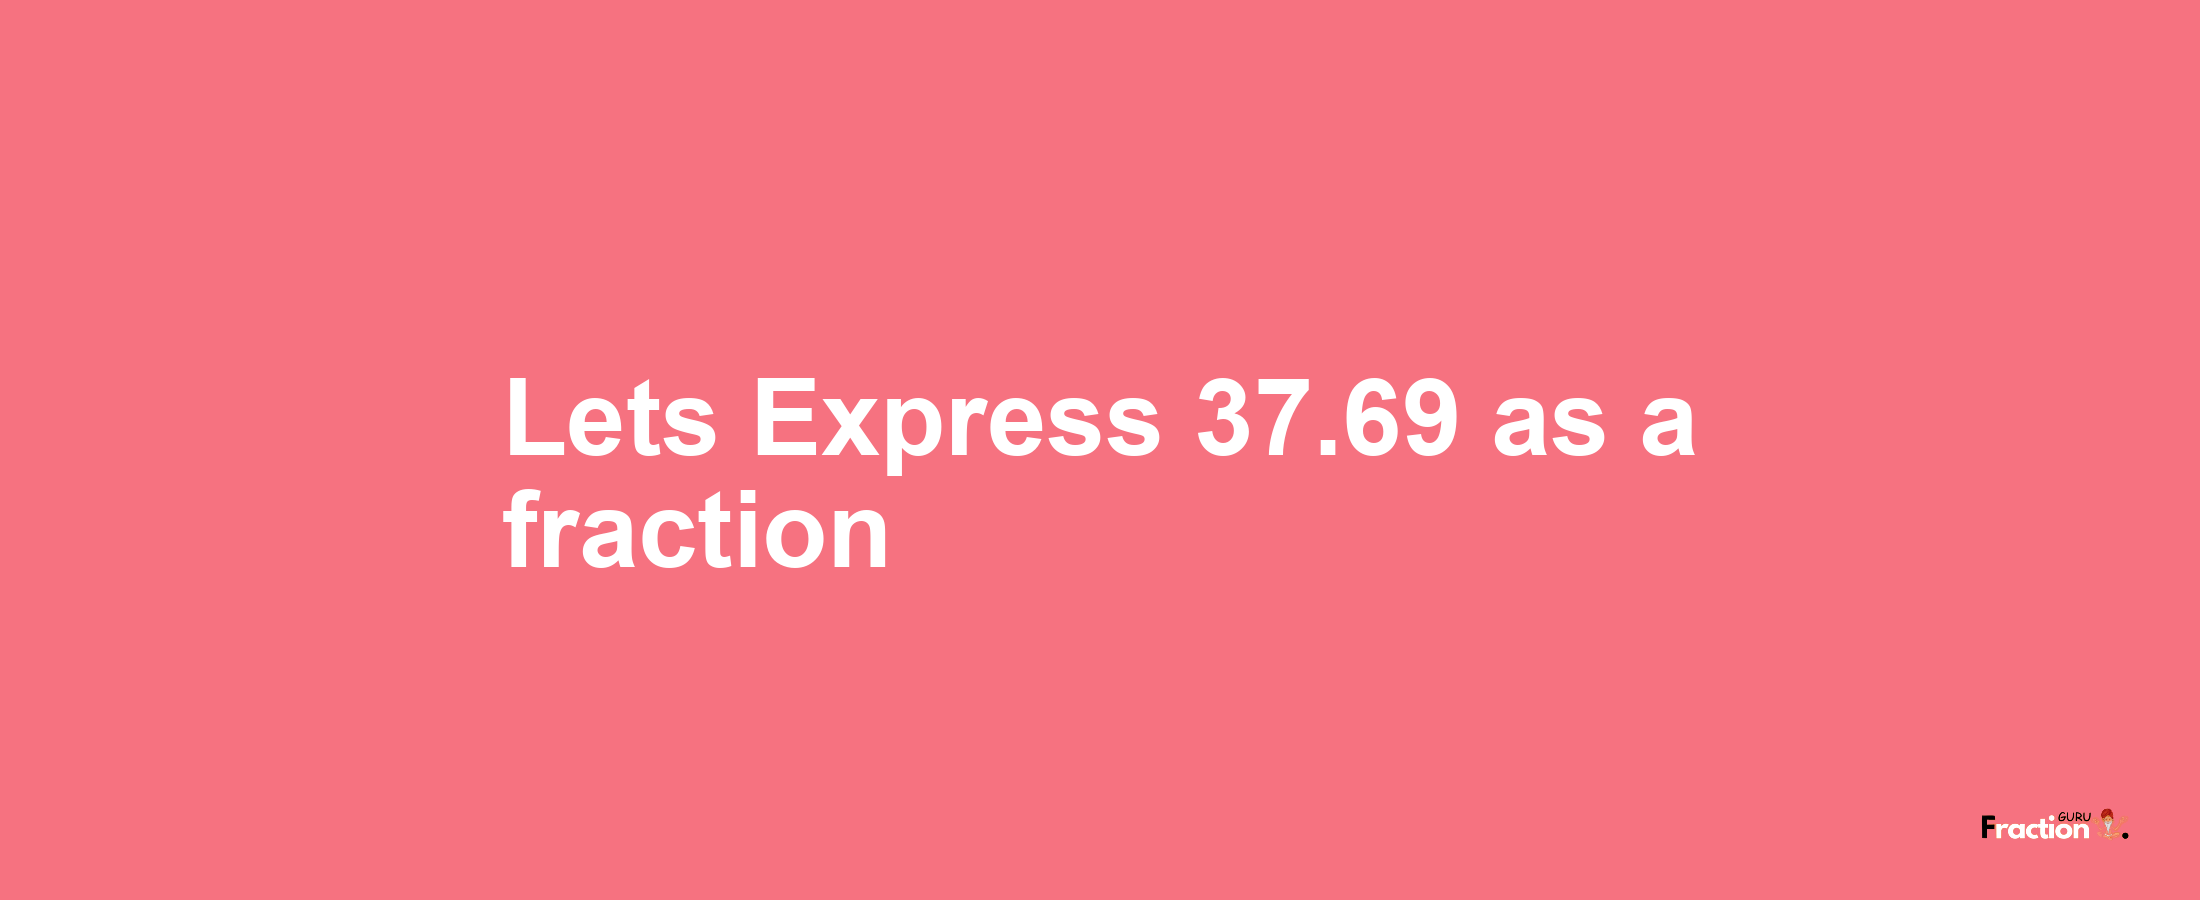 Lets Express 37.69 as afraction